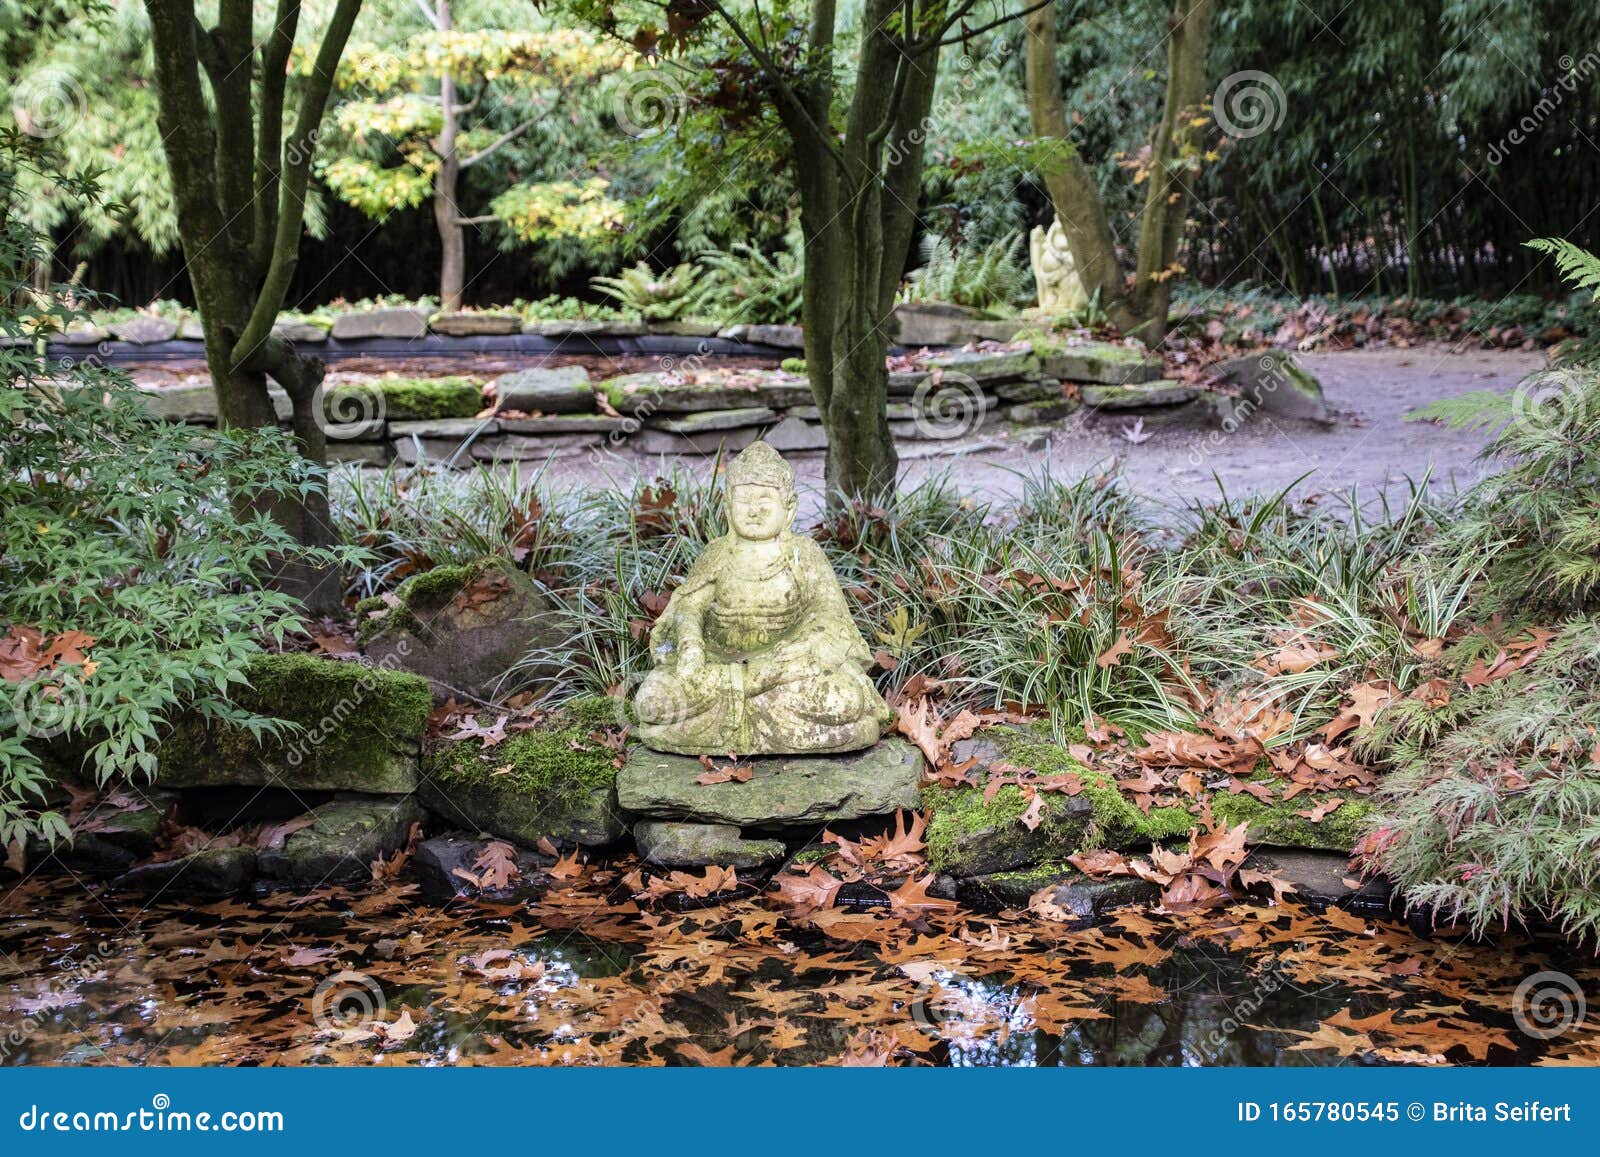 blød Faciliteter Glorious Ancient Buddha in the Park. in Harmony with Nature. Landscape Architecture  and Landscaping Stock Image - Image of peaceful, decorative: 165780545